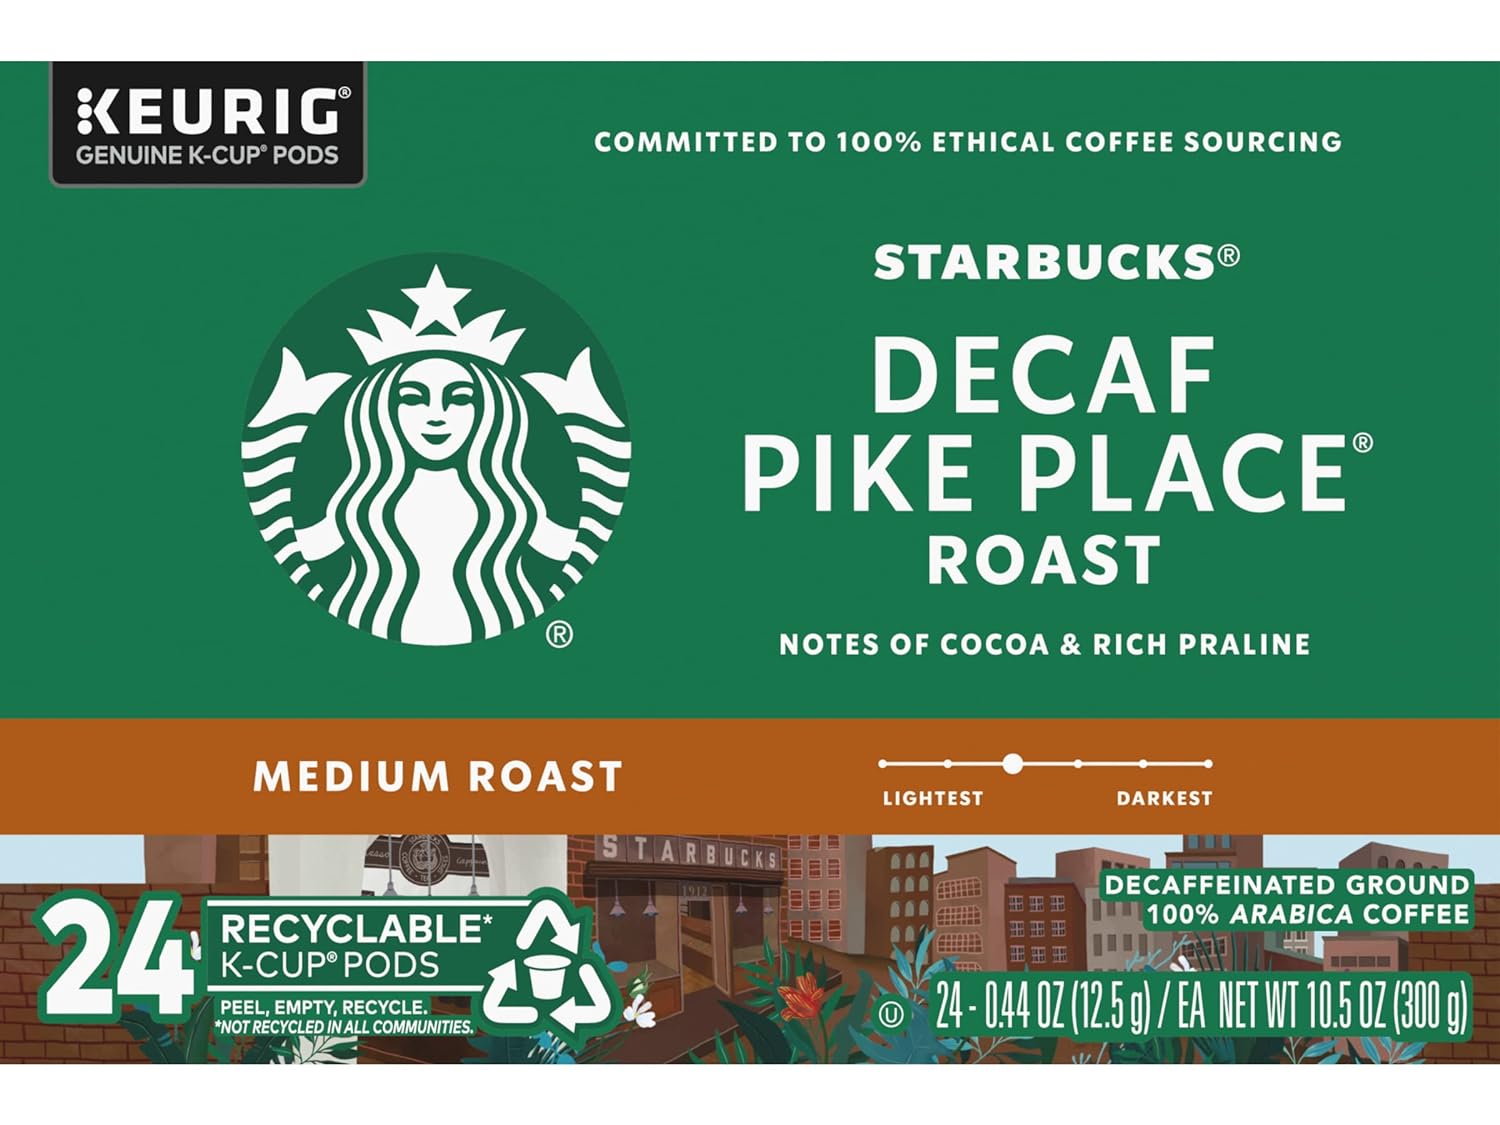 Starbucks Decaf House Blend Coffee K-Cup Pods, Medium Roast Decaffeinated Ground Coffee K-Cups for Keurig Brewing System, 10 CT K-Cups/Box (Pack of 3 Boxes)